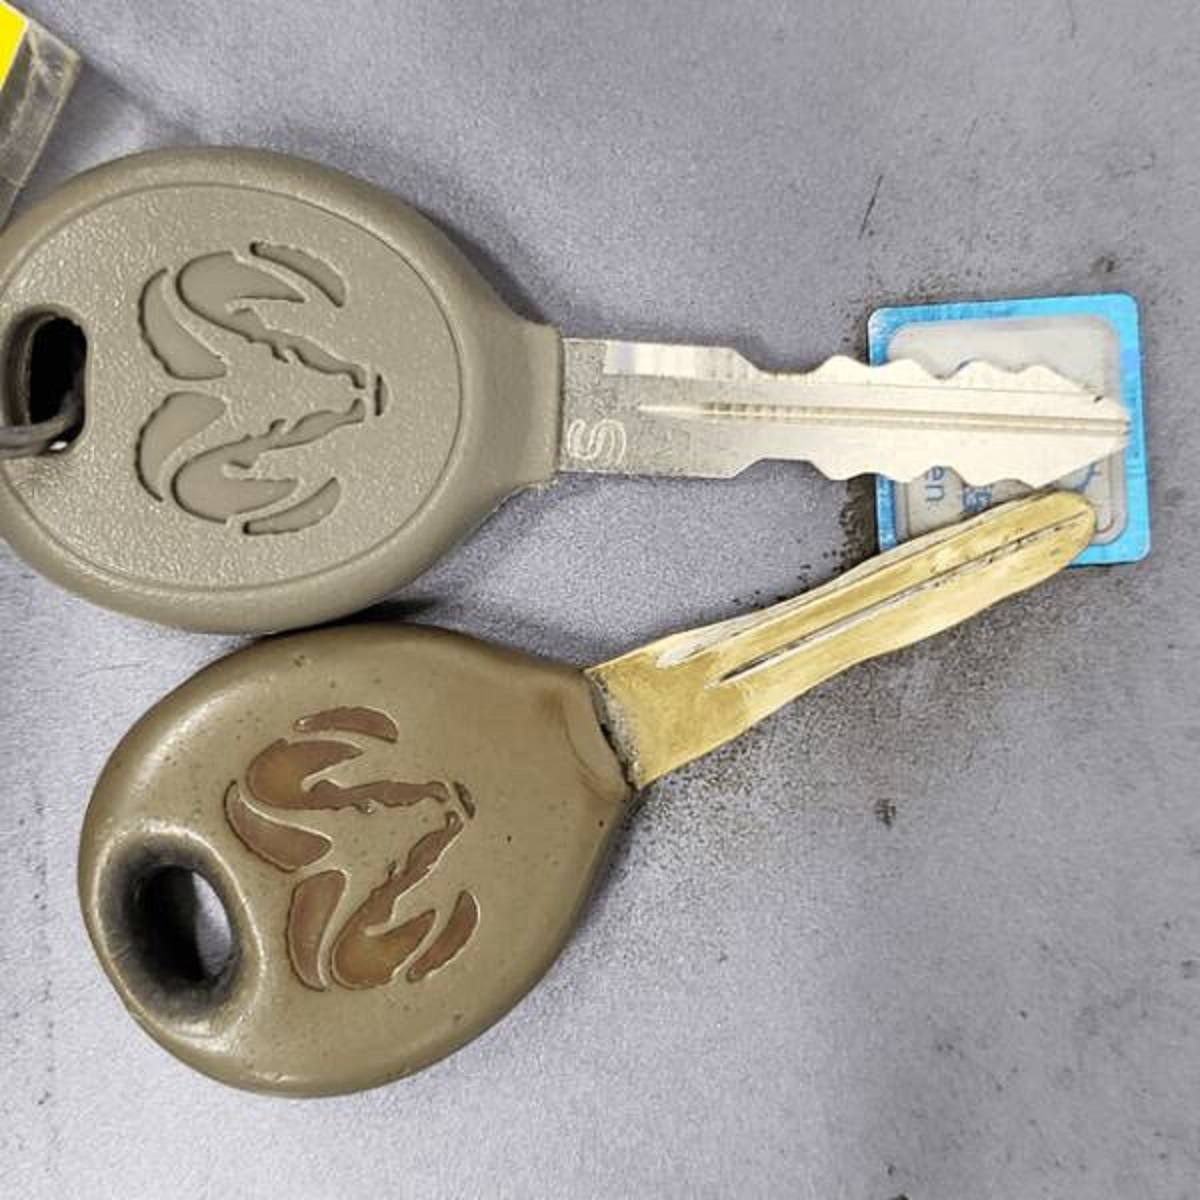 "This old worn key vs. a fresh cut one for the same vehicle"